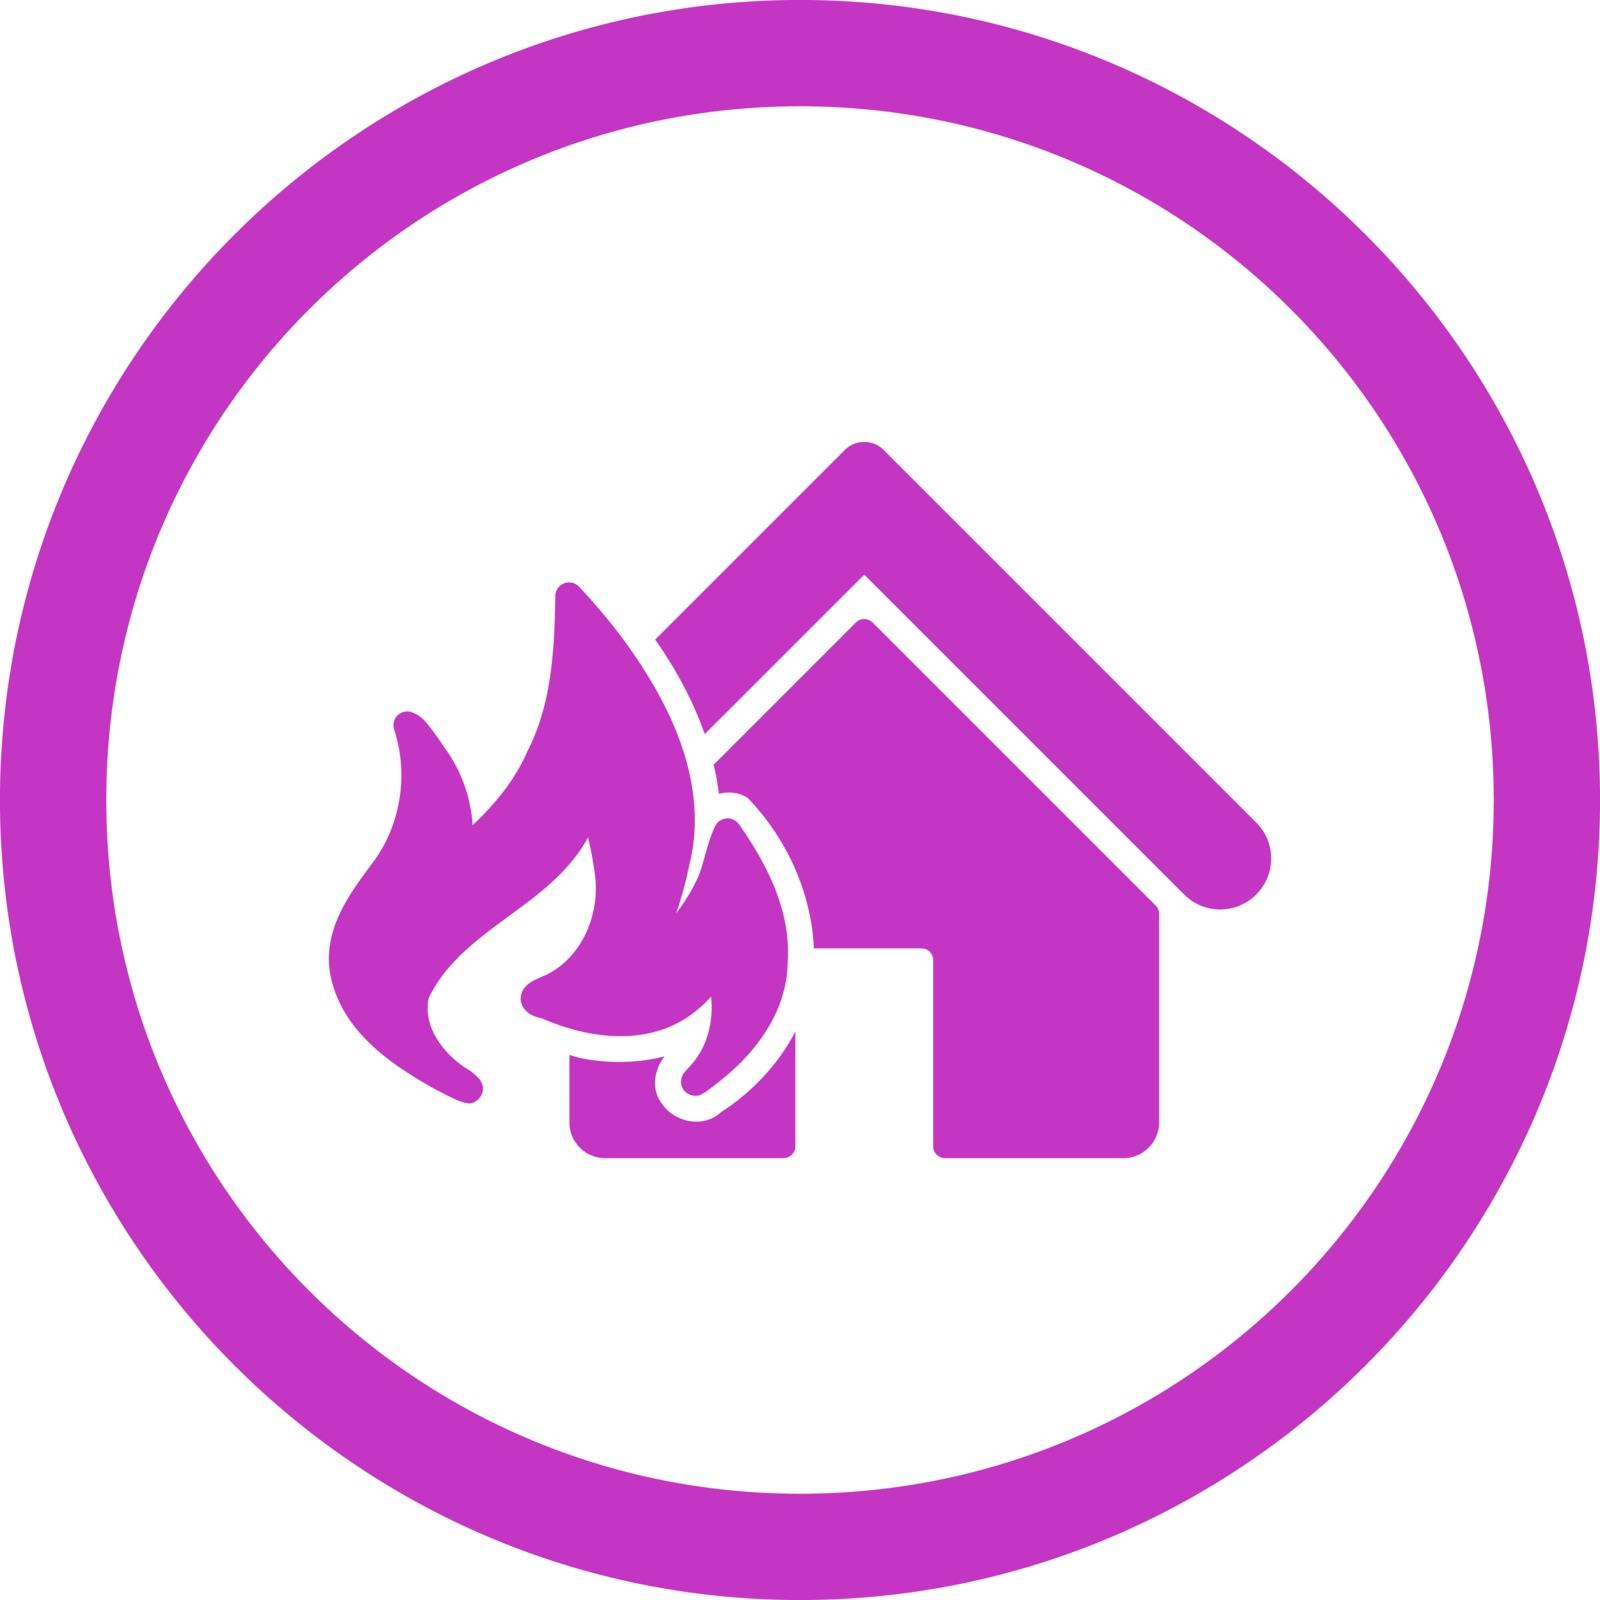 Fire Damage vector icon. This flat rounded symbol uses violet color and isolated on a white background.